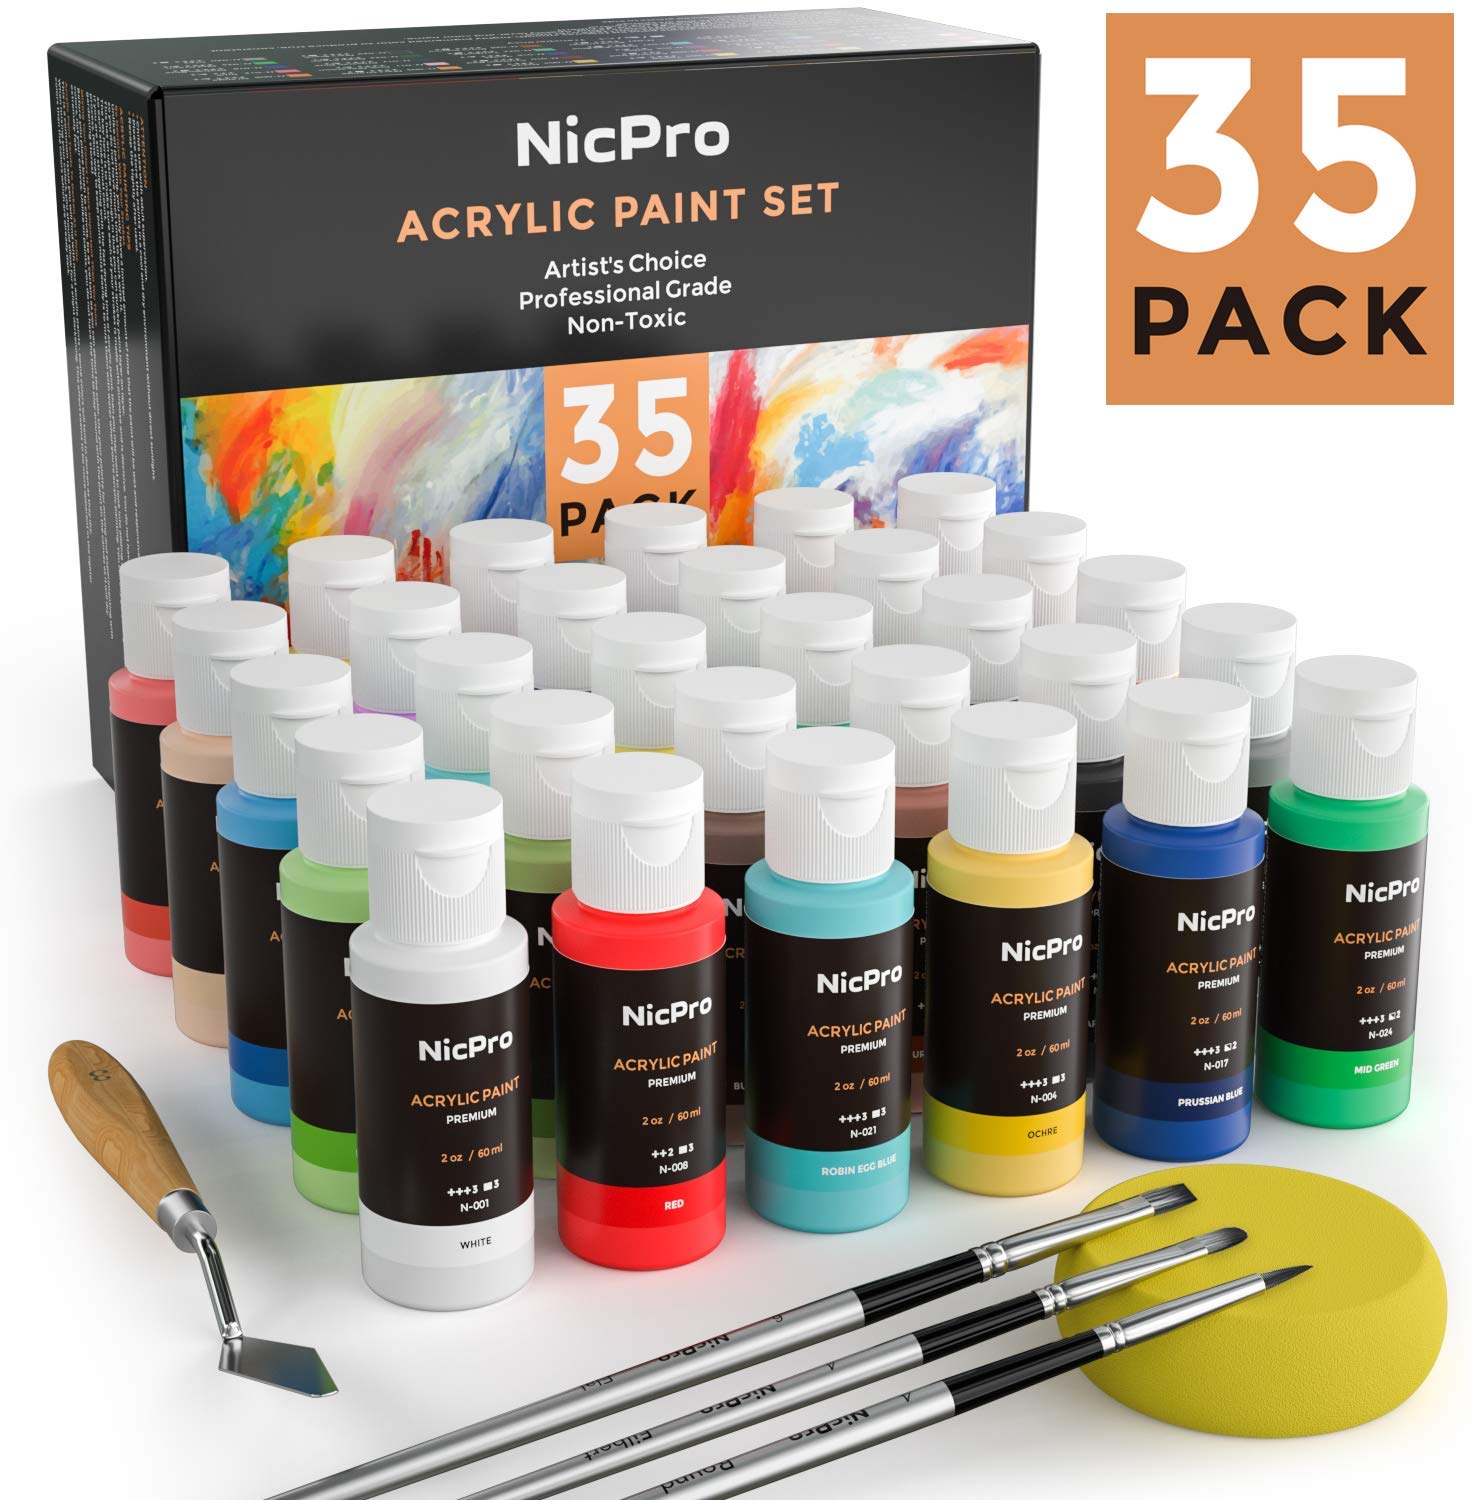 Nicpro 30 Colors Acrylic Paint Set/Tube(2 oz, 60ml) with 3 Brushes, Sponge & Paint Knife, Rich Pigments for Artist, Adults & Kids, Ideal for Canvas Wood Rock Crafts Model Fabric Ceramic Painting